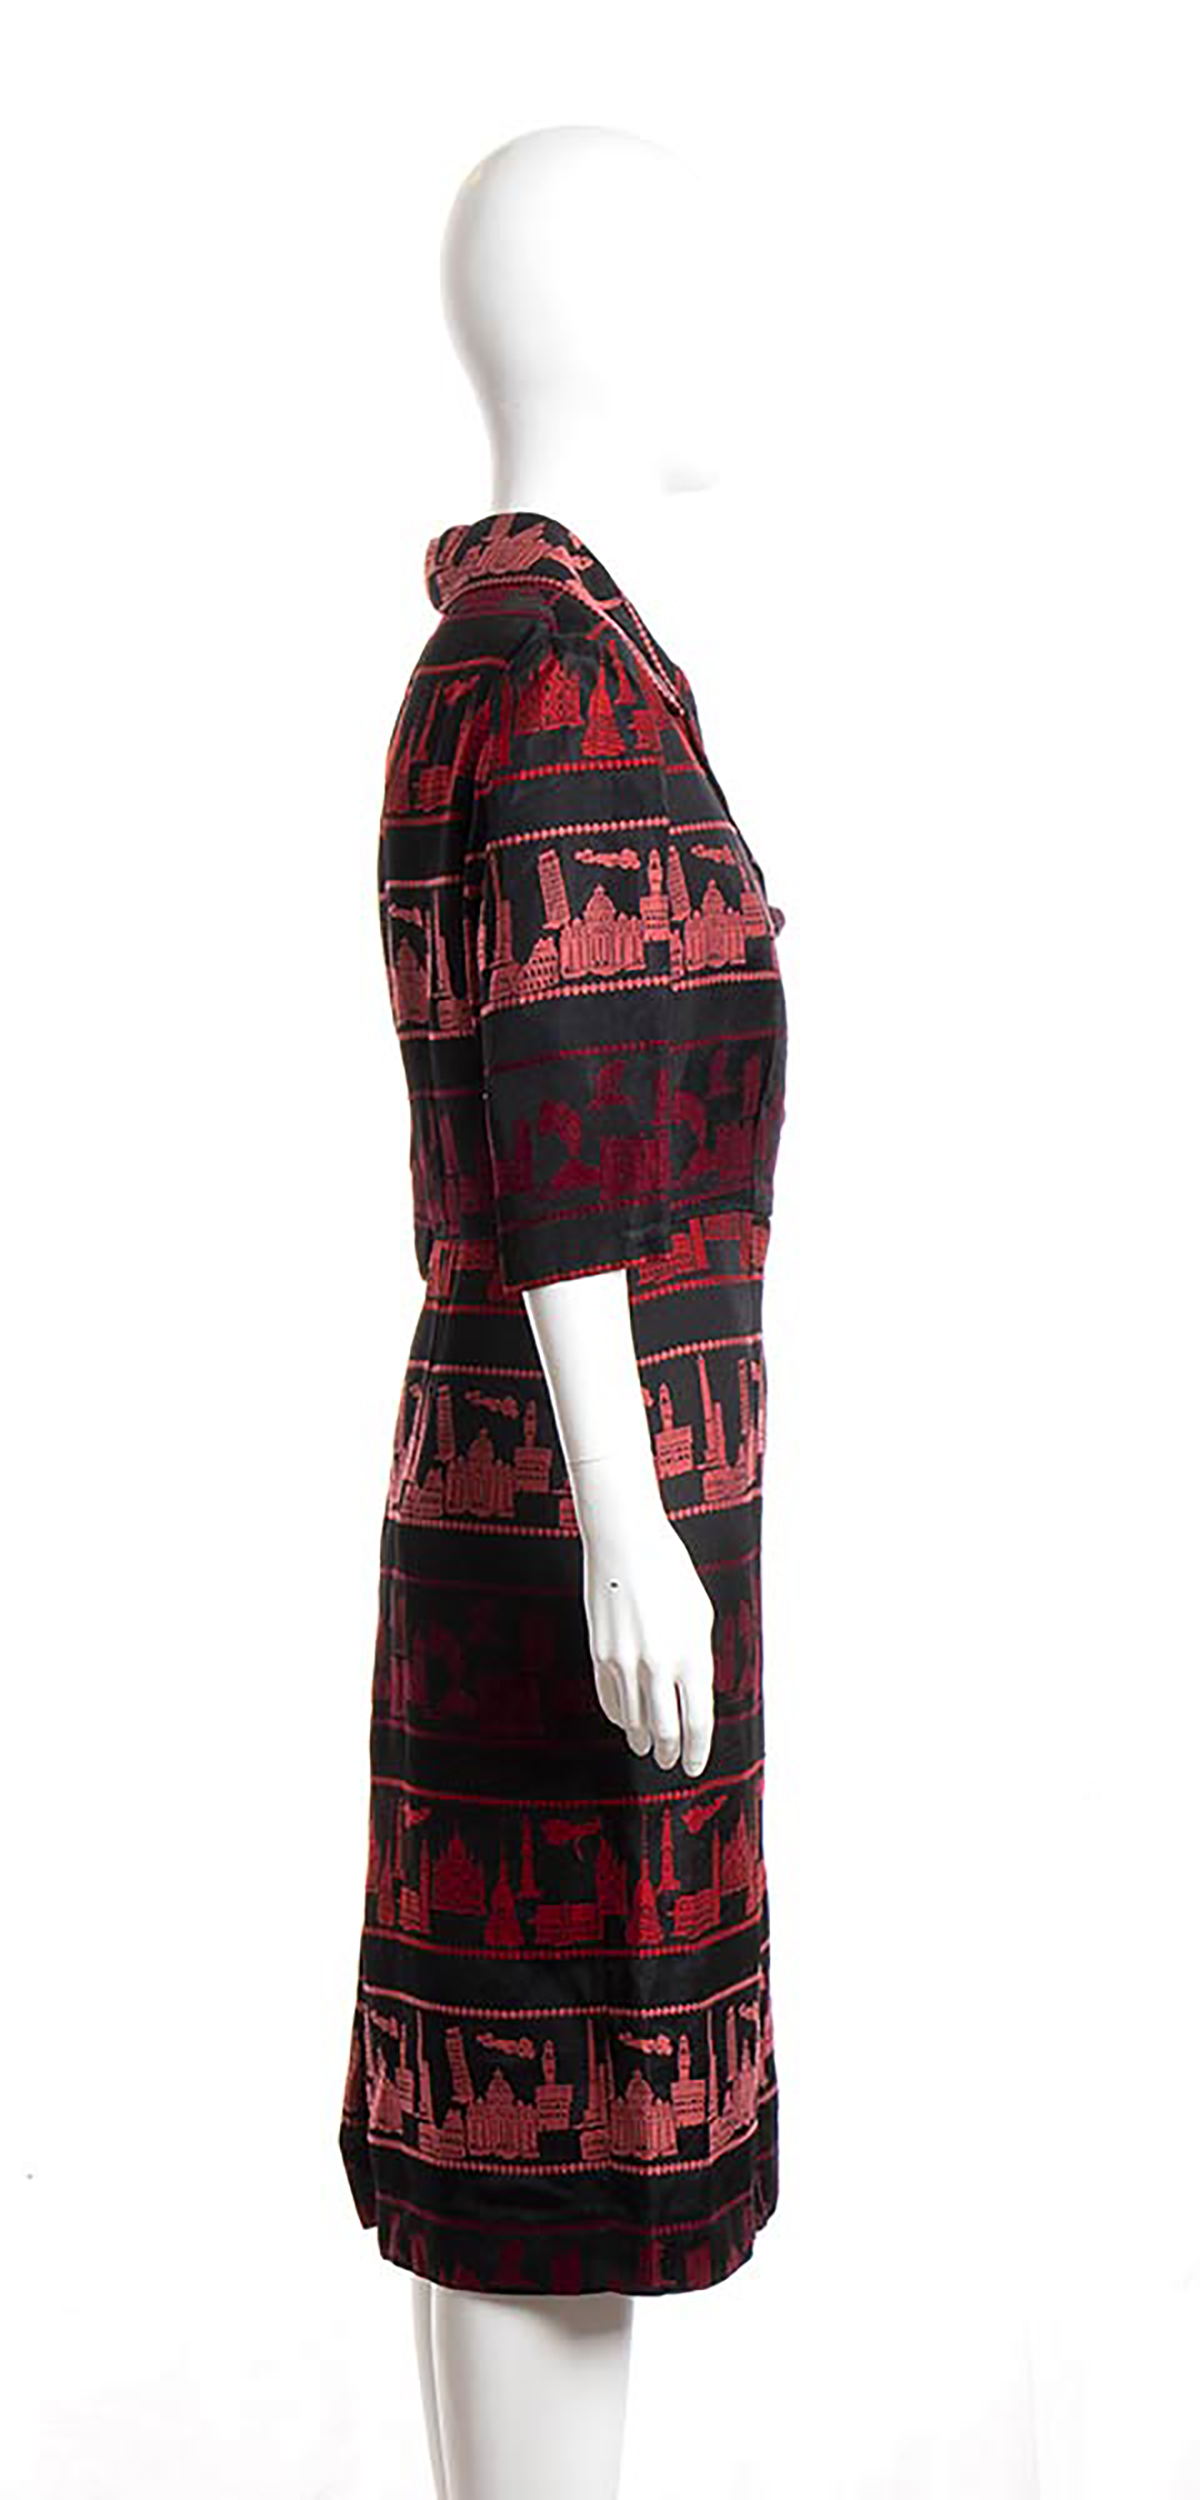 DRESS Late 60s A black background shades of red Italian monuments skyline pattern poly blend - Image 2 of 4